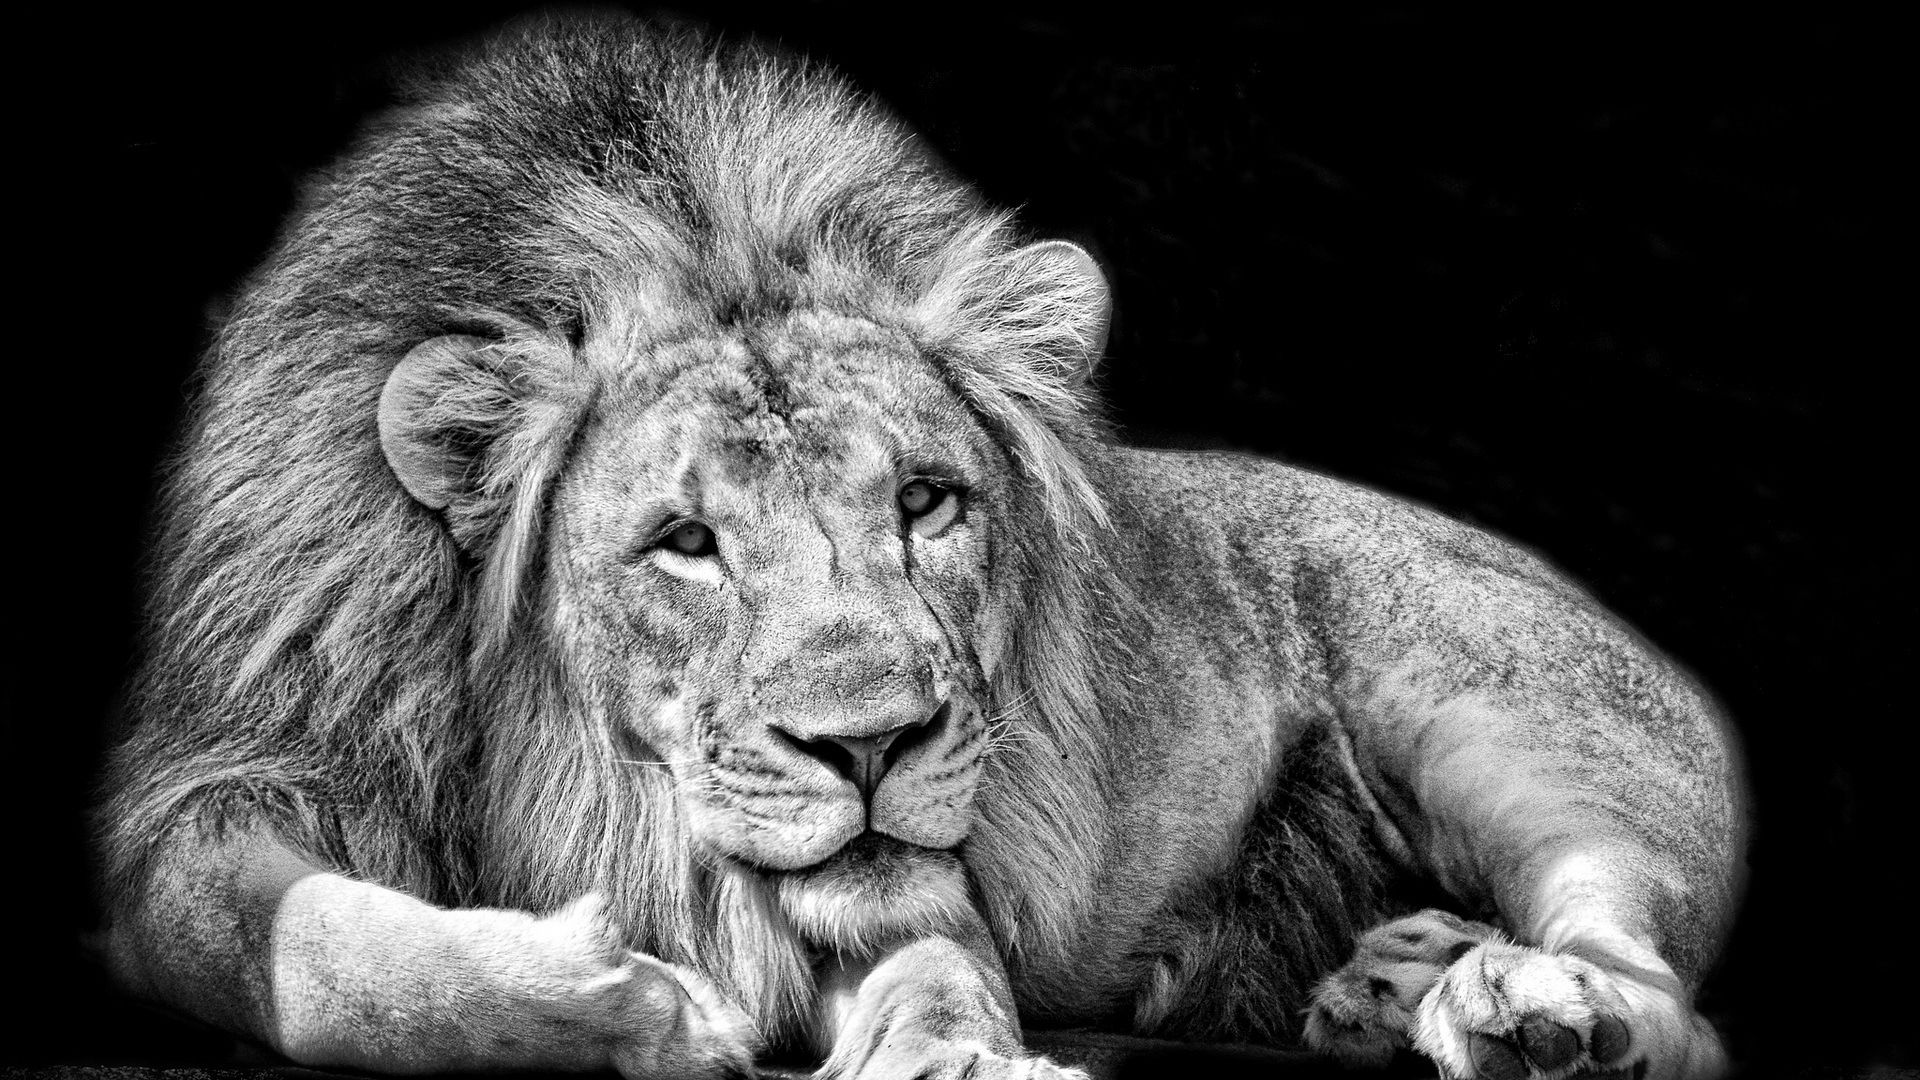 Download wallpaper 1920x1080 lion, king, background full hd, hdtv, fhd,  1080p hd background